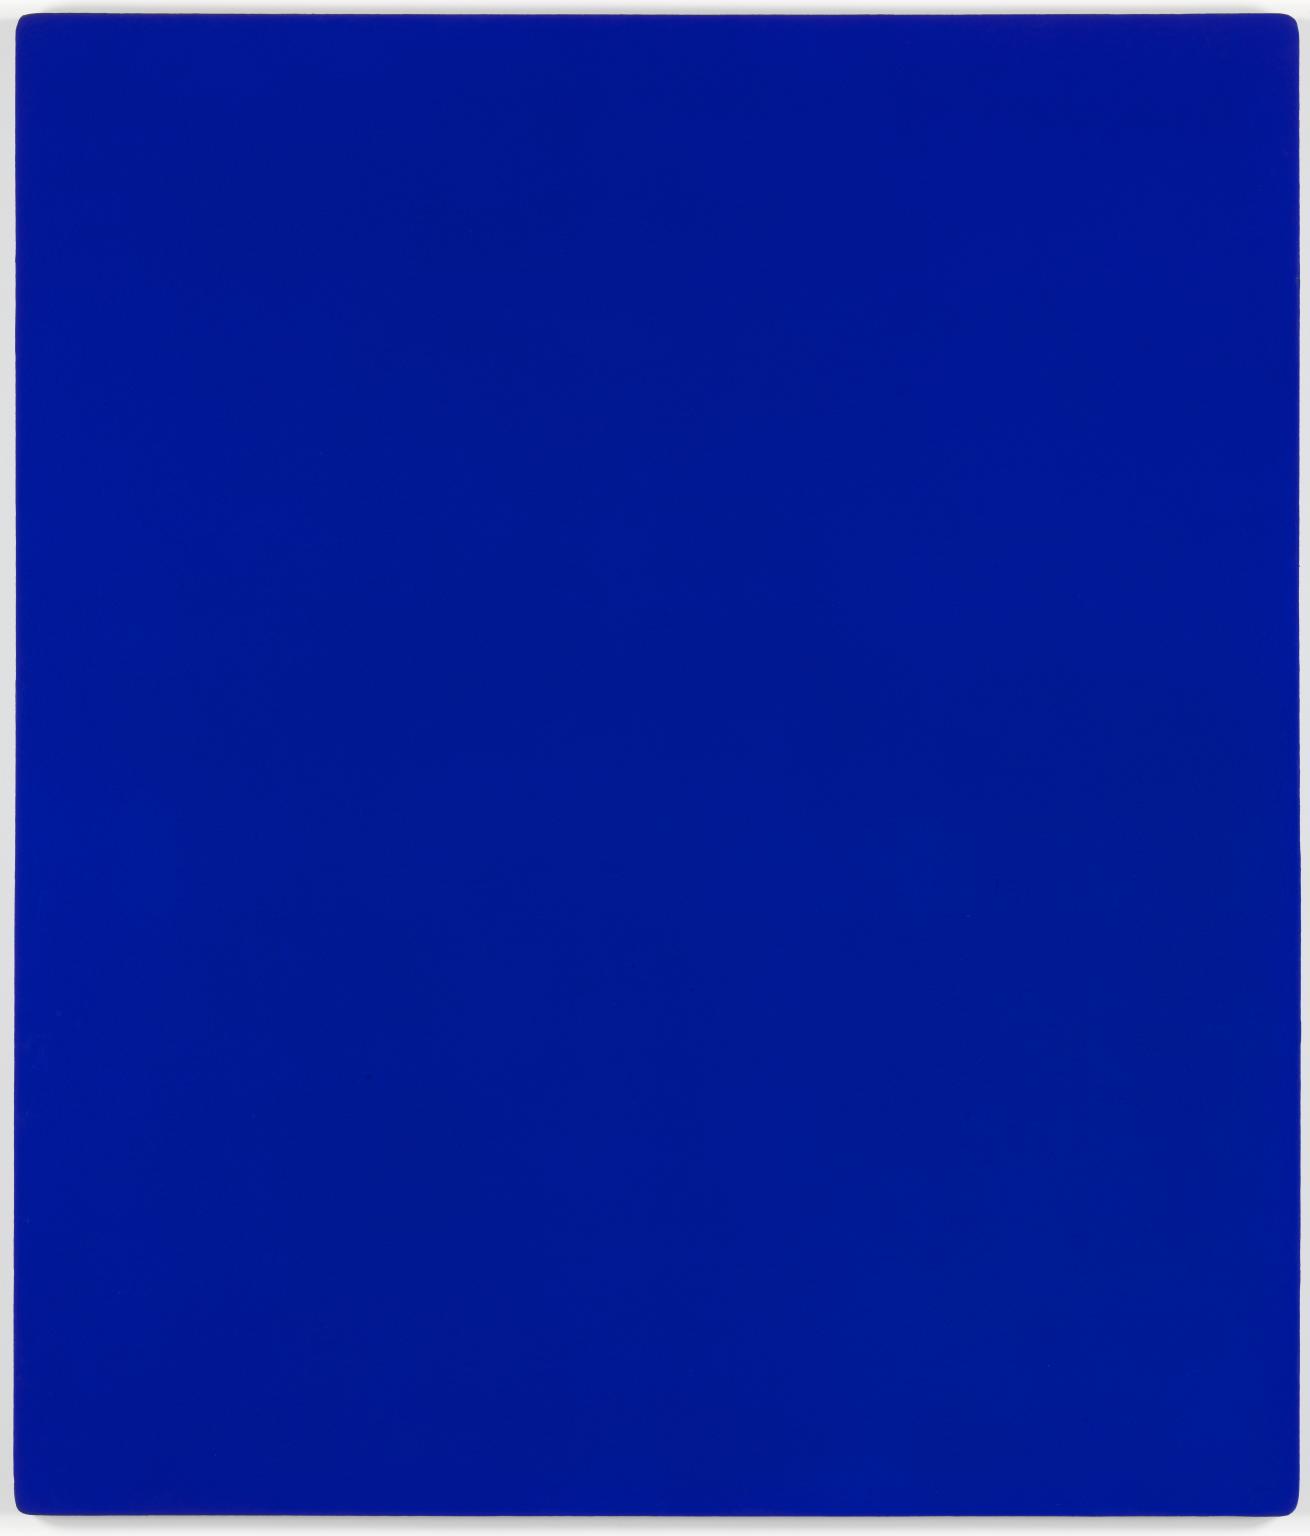 Yves Klein, IKB 79, 1959, Paint on canvas on plywood, 55 by 47 inches. Courtesy of the Tate, London. On Roland Nivelais by Raphy Sarkissian.